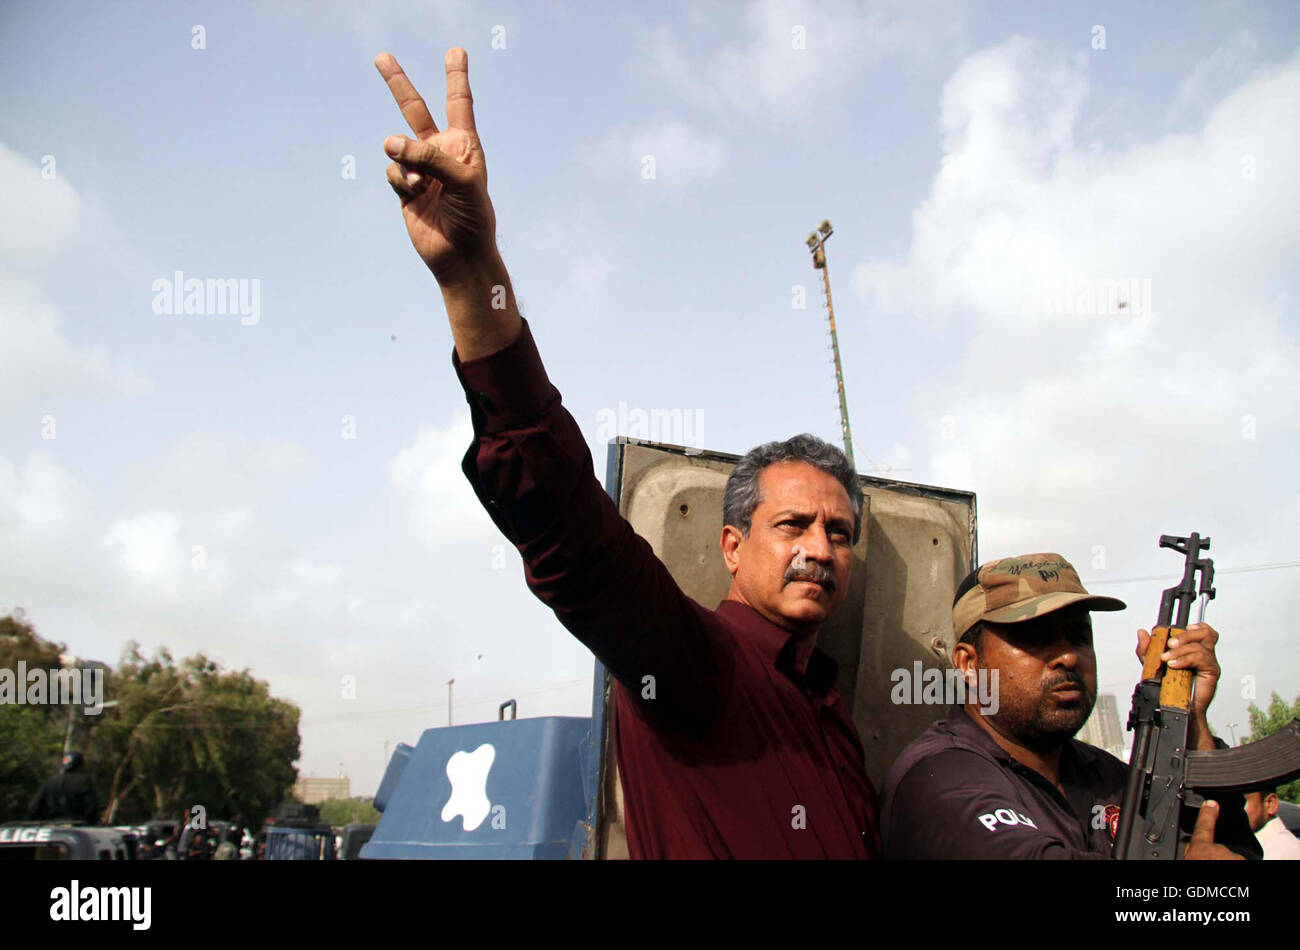 Muttahida Qaumi Movement leader Wasim Akhtar makes victory sign as he is being shifted to Karachi's Central Prison in a police van after rejected his interim bail in a terror facilitation case at an anti-terrorism court (ATC) in Karachi on Tuesday, July 19, 2016. Muttahida Qaumi Movement (MQM) leaders Wasim Akhtar and Rauf Siddiqui, and Pak Sarzameen Party president Anis Qaimkhani were taken into custody in a terror facilitation case after an anti-terrorism court (ATC) rejected their interim bail. Stock Photo